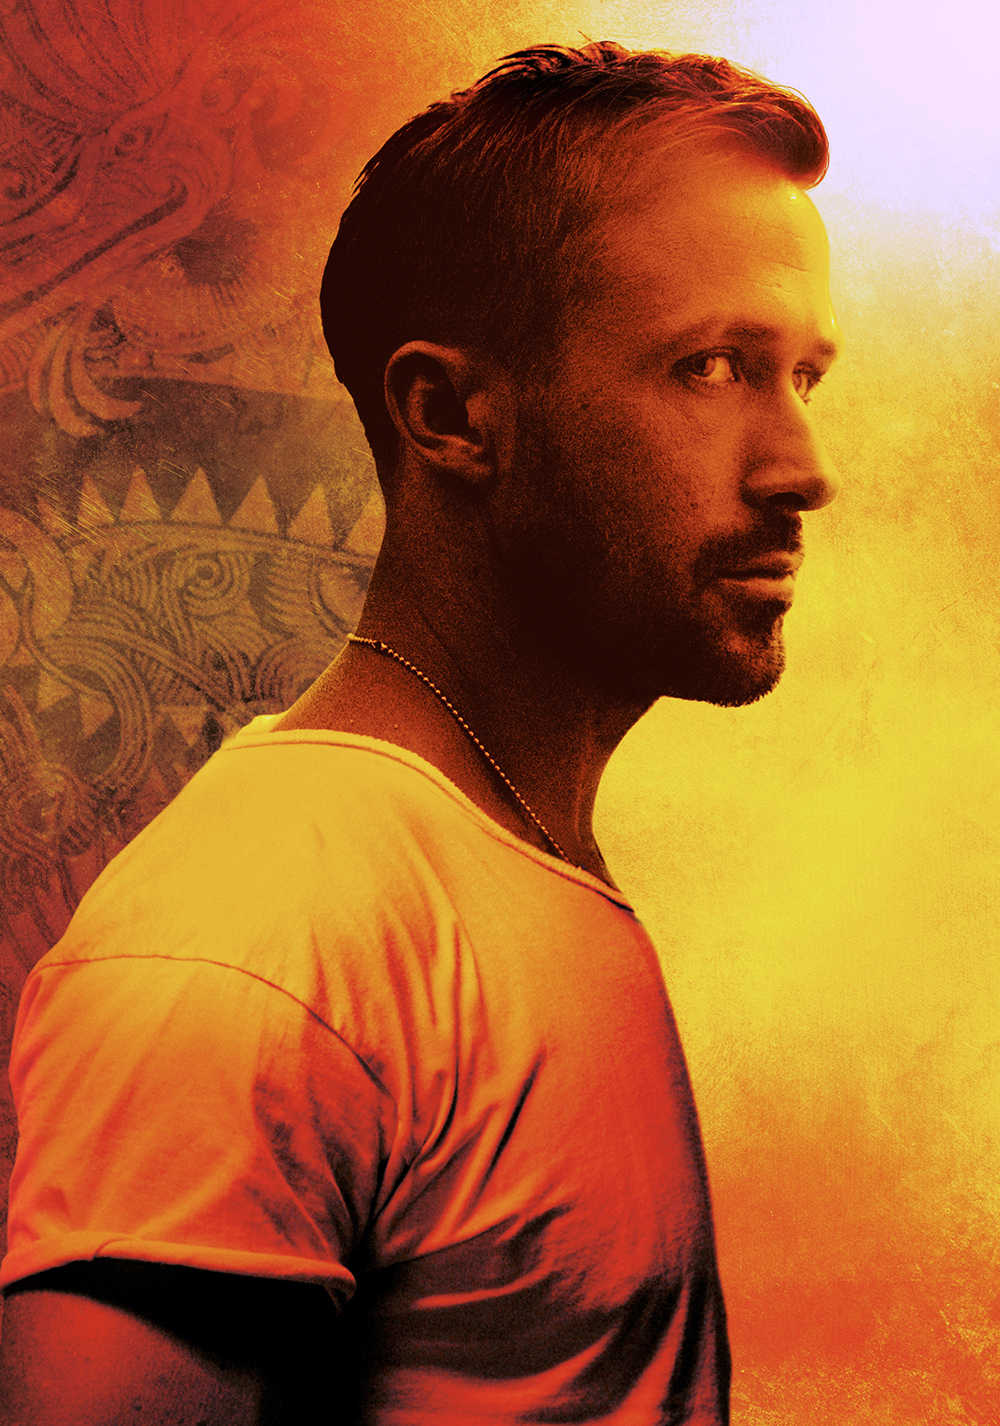 Only God Forgives Picture